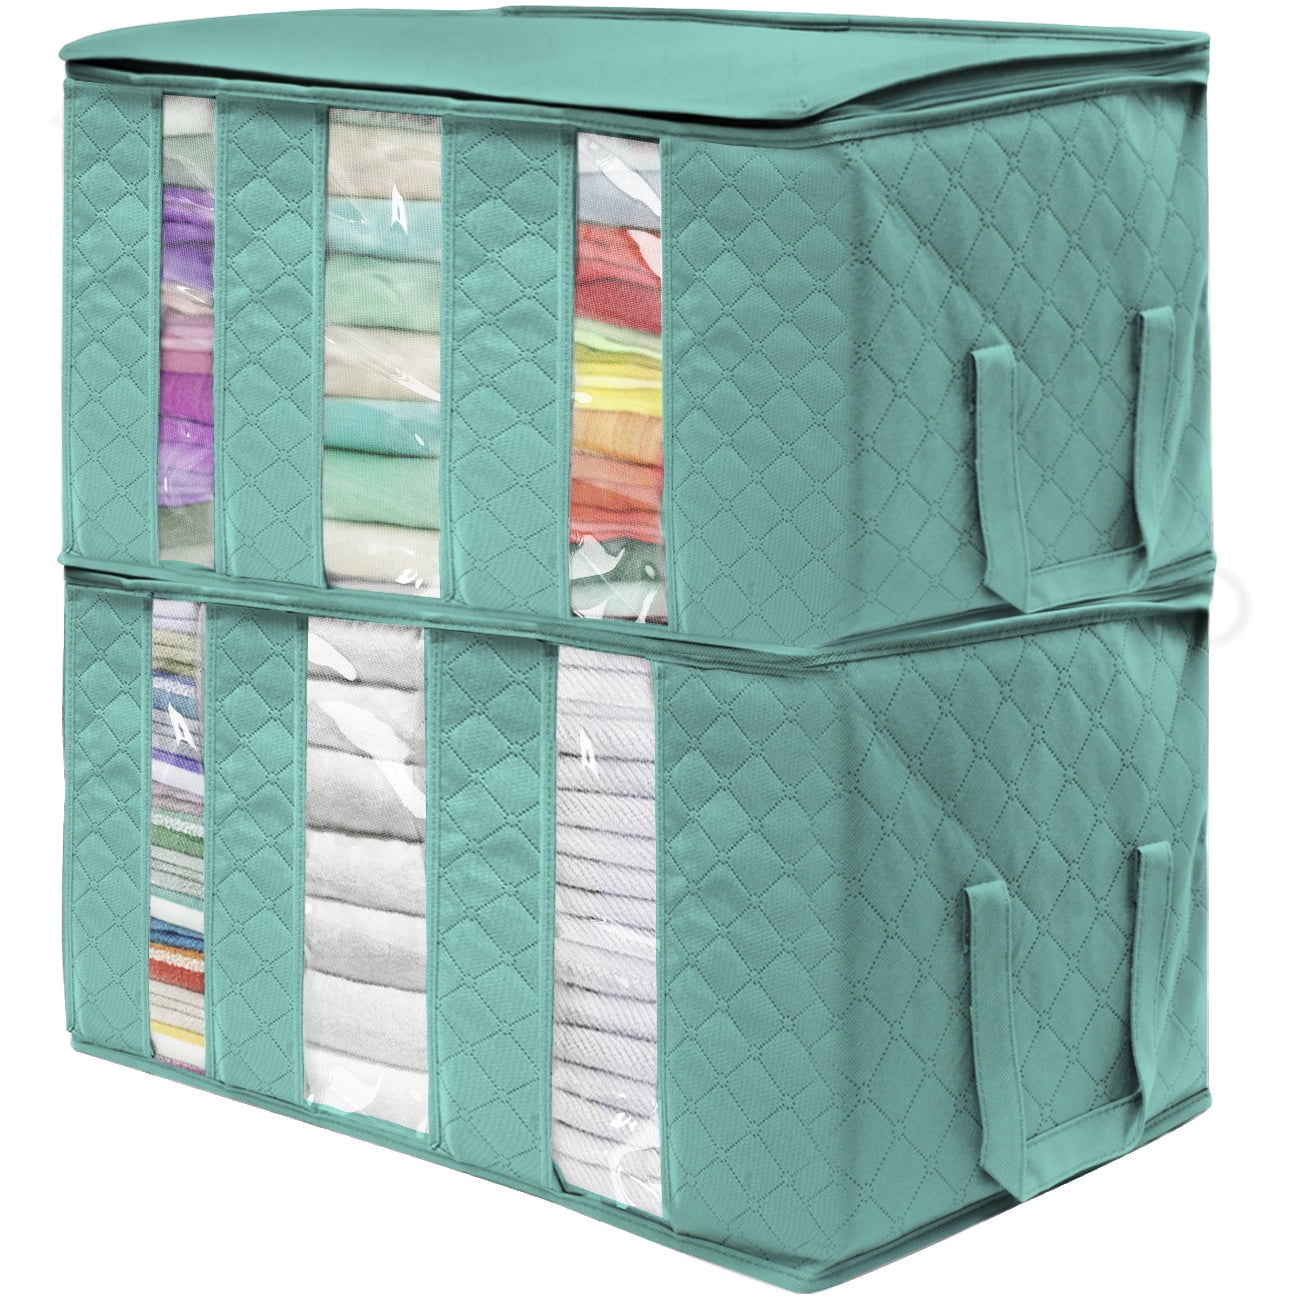 Details about   Foldable Storage Canvas Collapsible Folding Box Clothes Organizer Fabric HS3